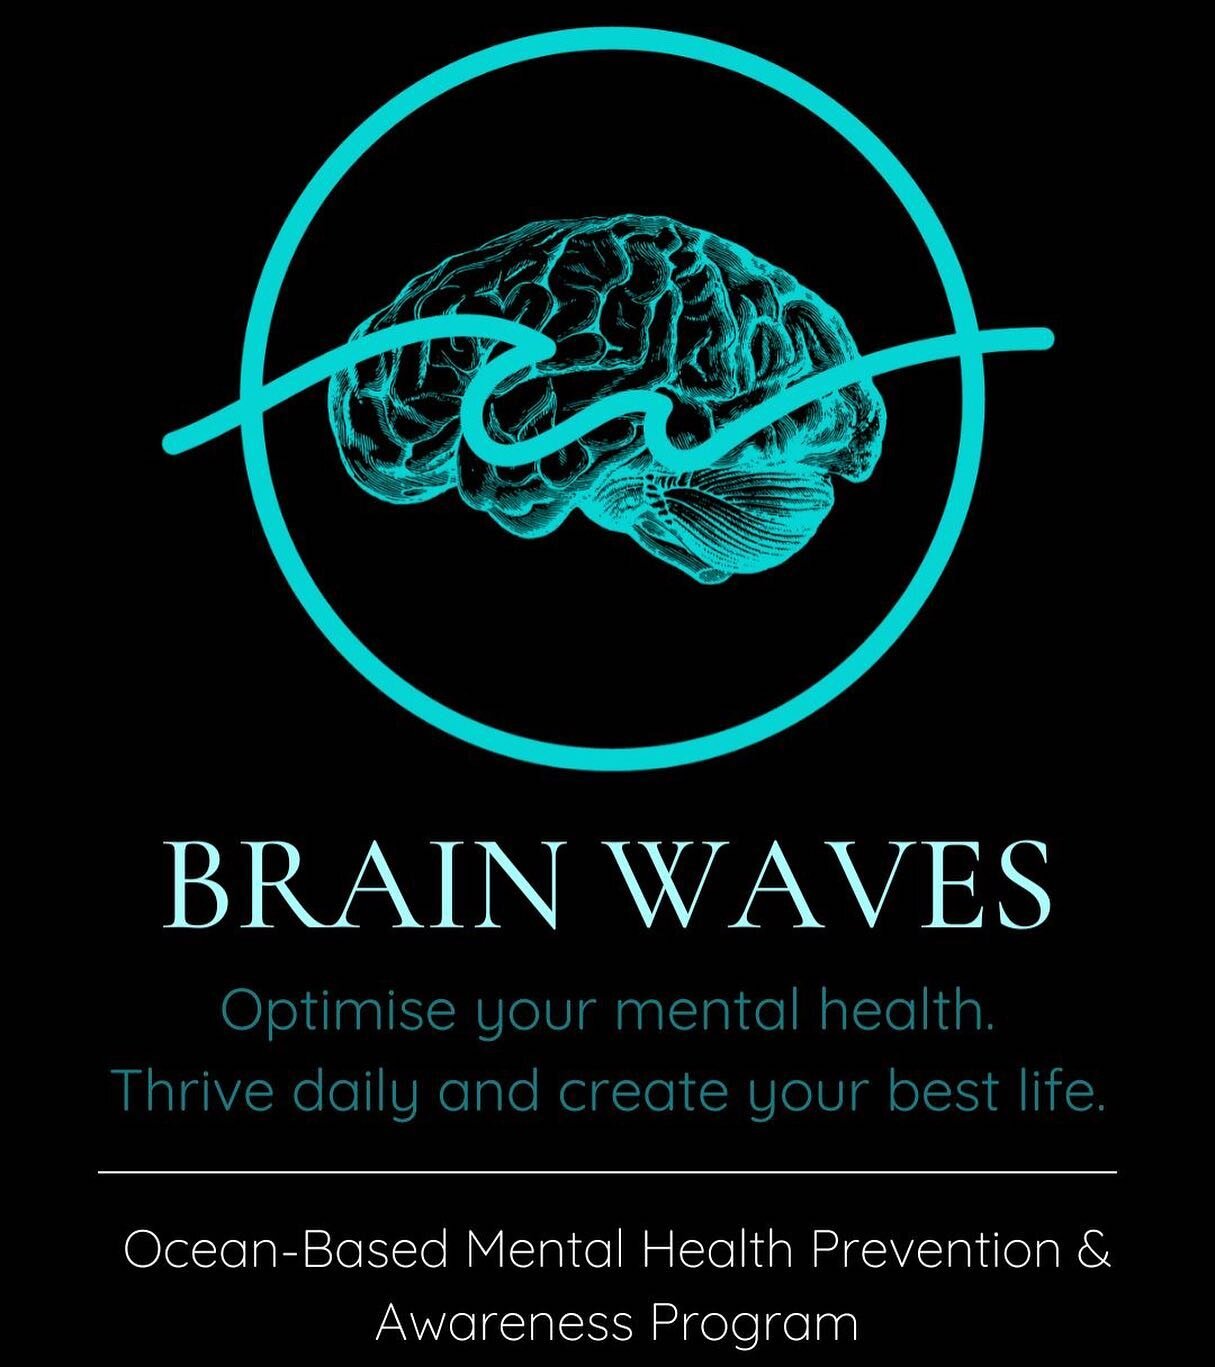 @mrsurfingacademy is excited to announce the launch of our new #mentalhealth prevention and awareness program @brain.waves.australia

Many people today can feel overstimulated by their environment and do not have the tools to manage their feelings of